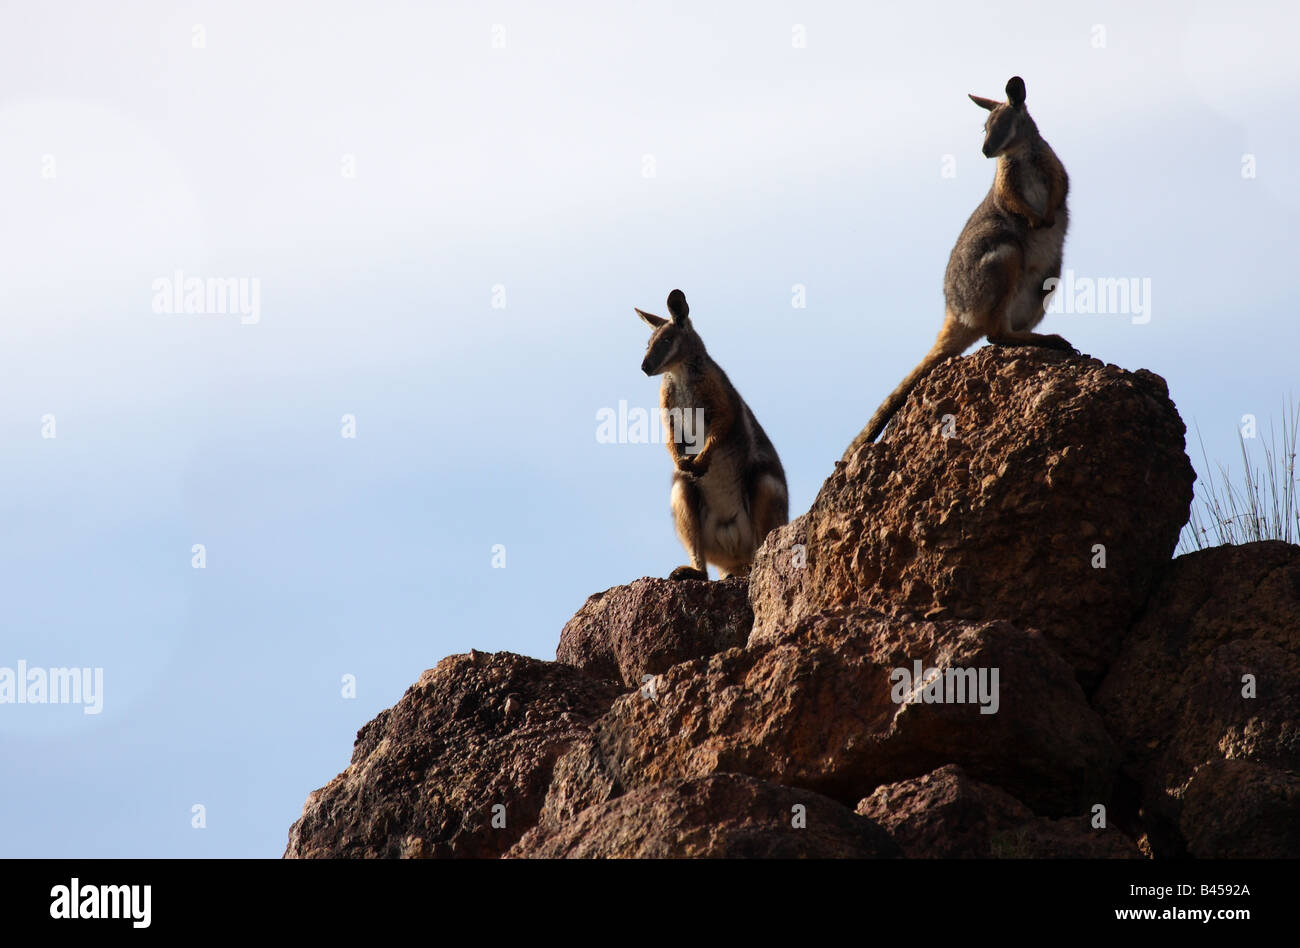 Yellow-footed rock wallabies standing on a rock Stock Photo